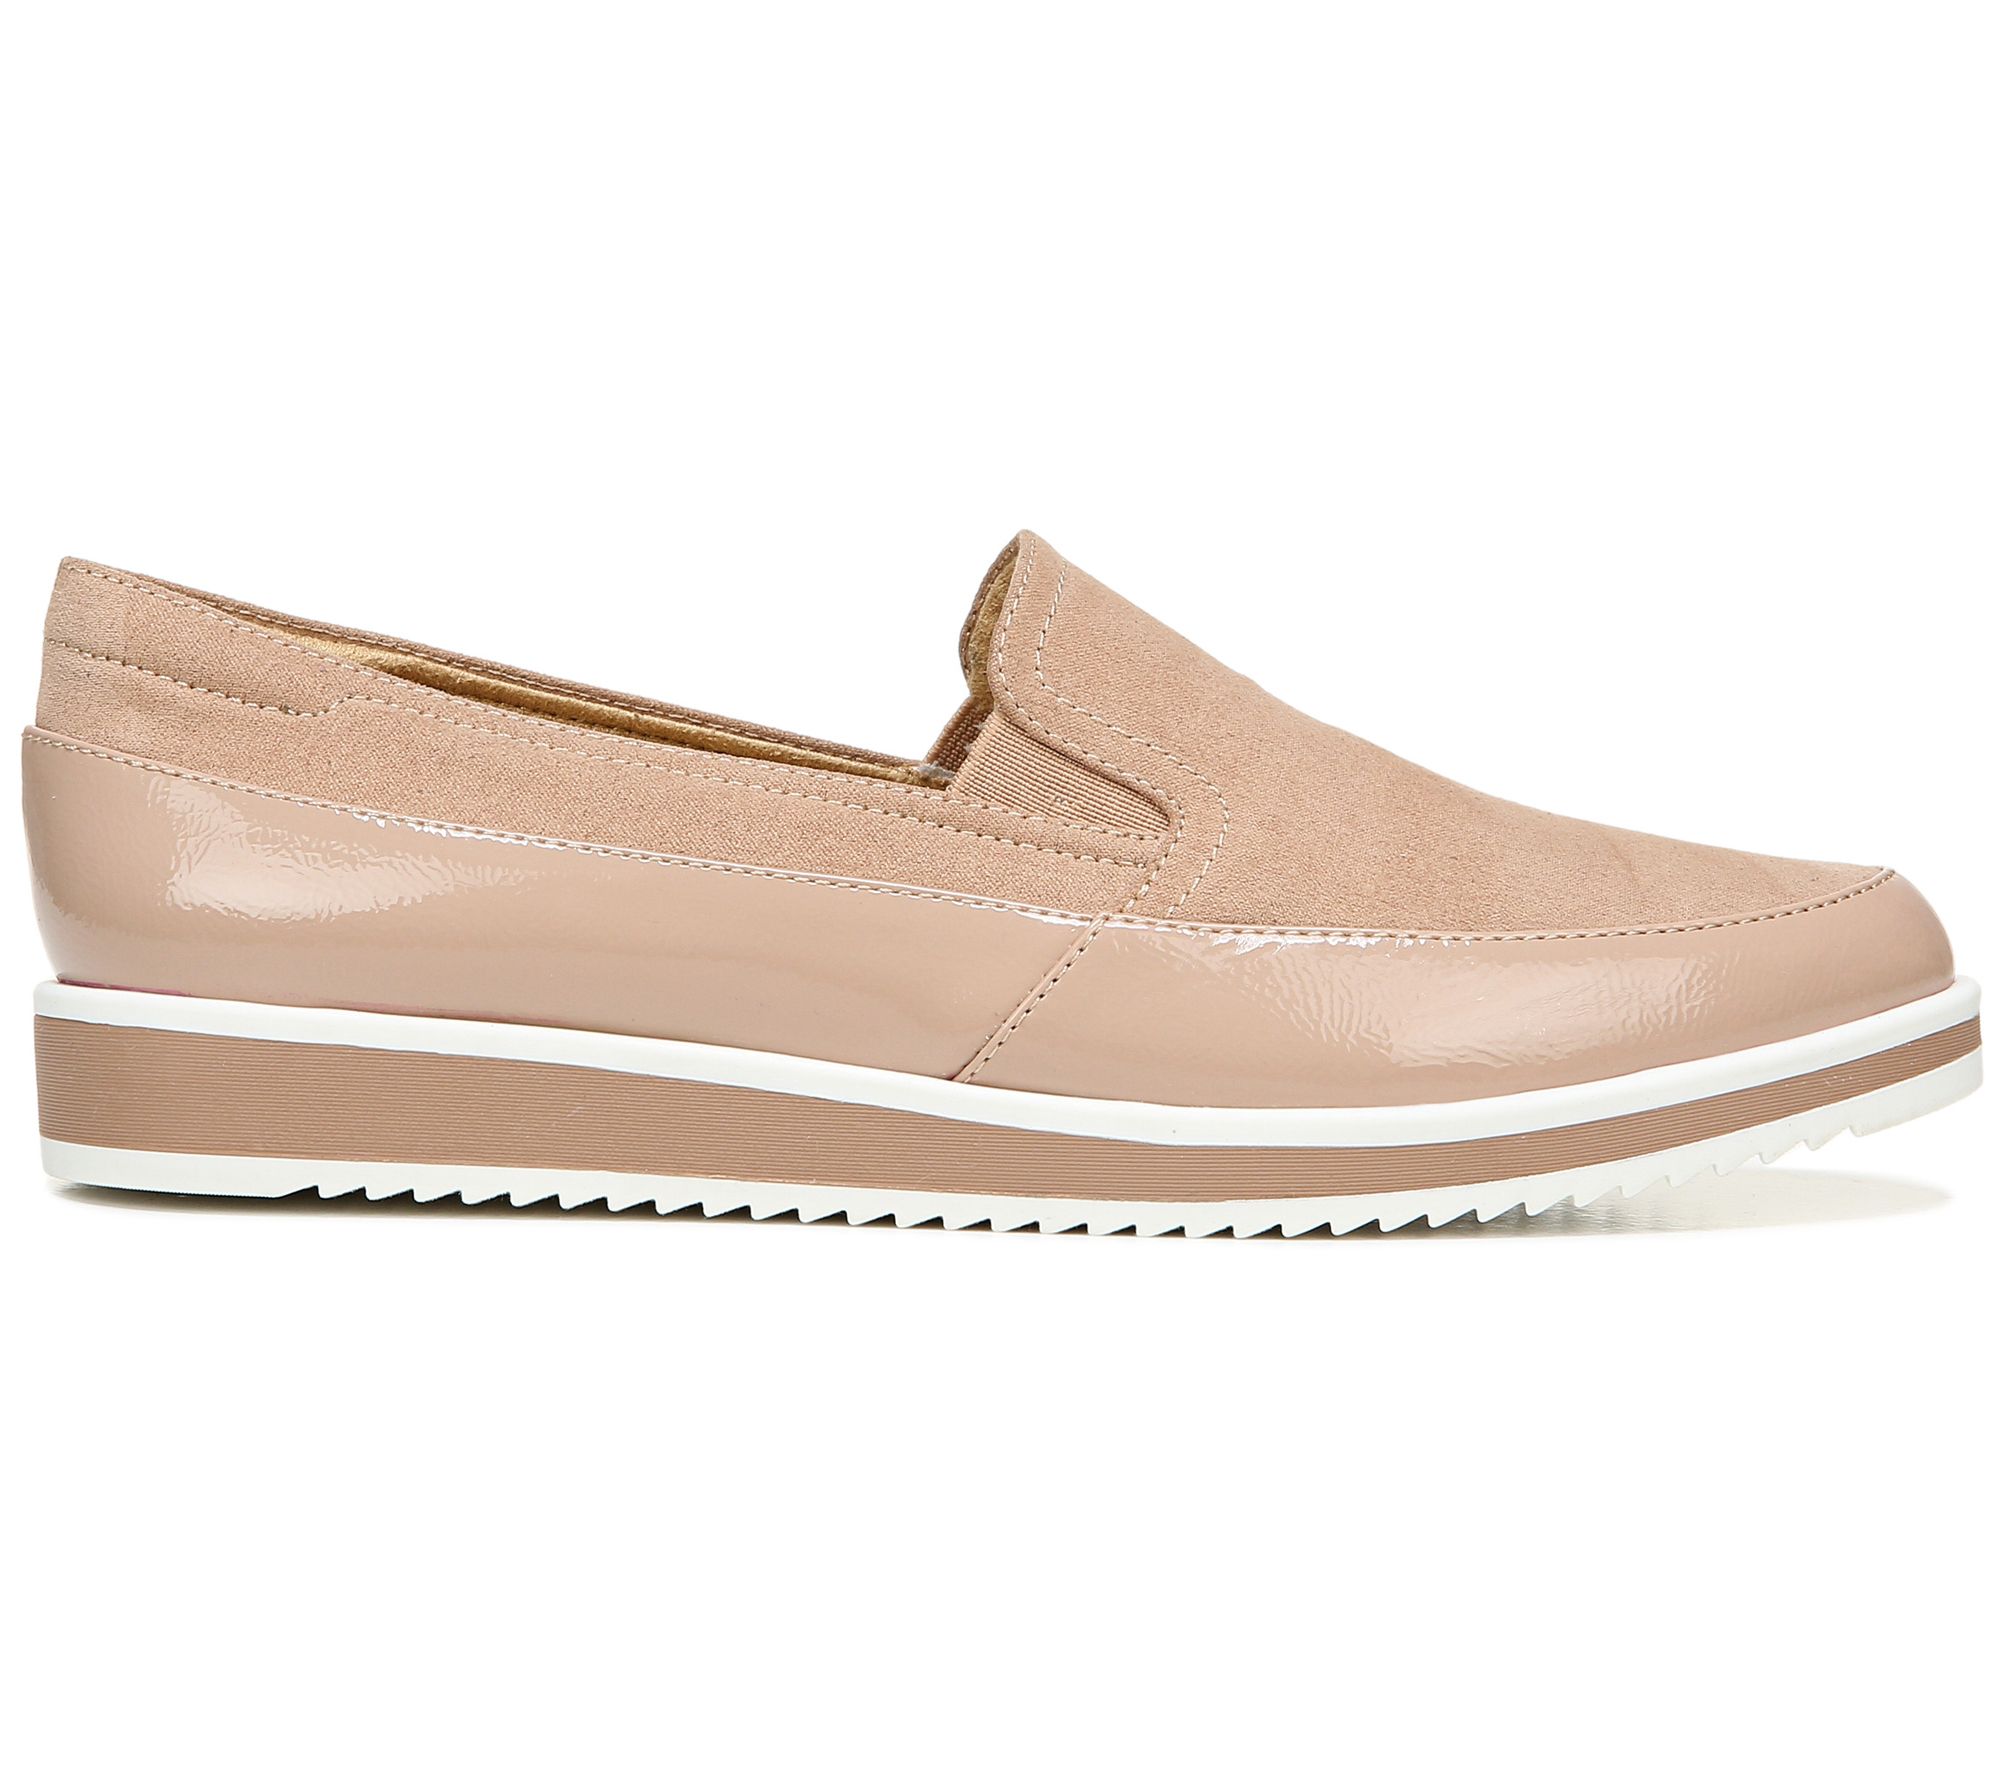 Naturalizer Slip-On Sporty Loafers - Rome - QVC.com